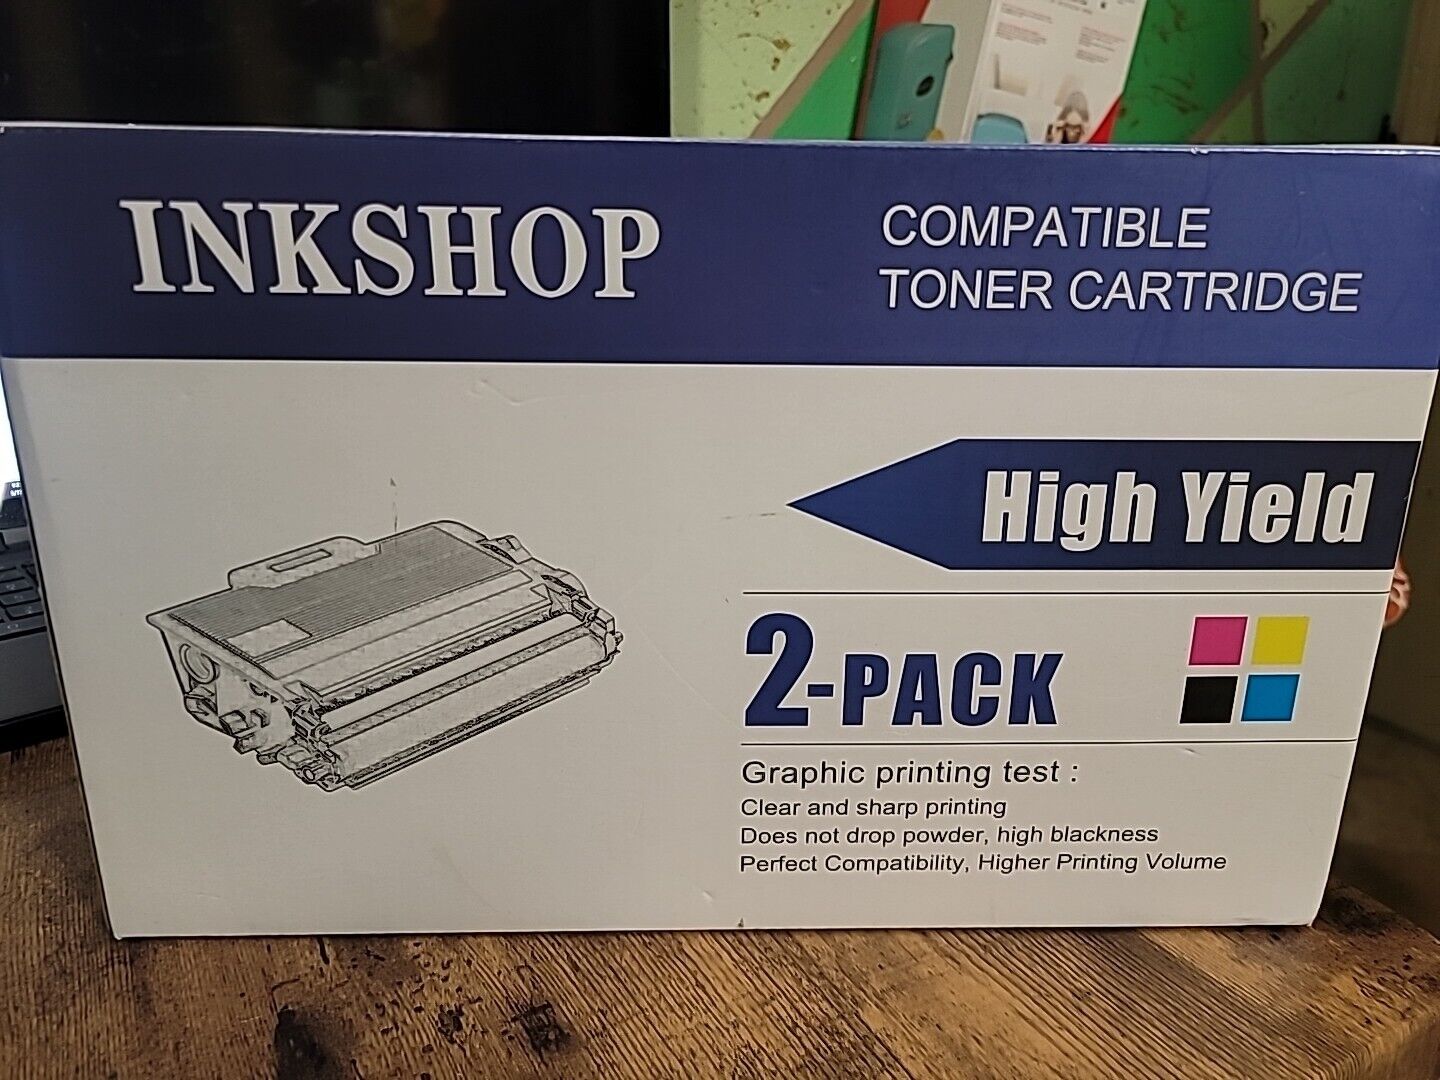 Inkshop TN850 High Yield Toner, Brother Compatible 2 Pack